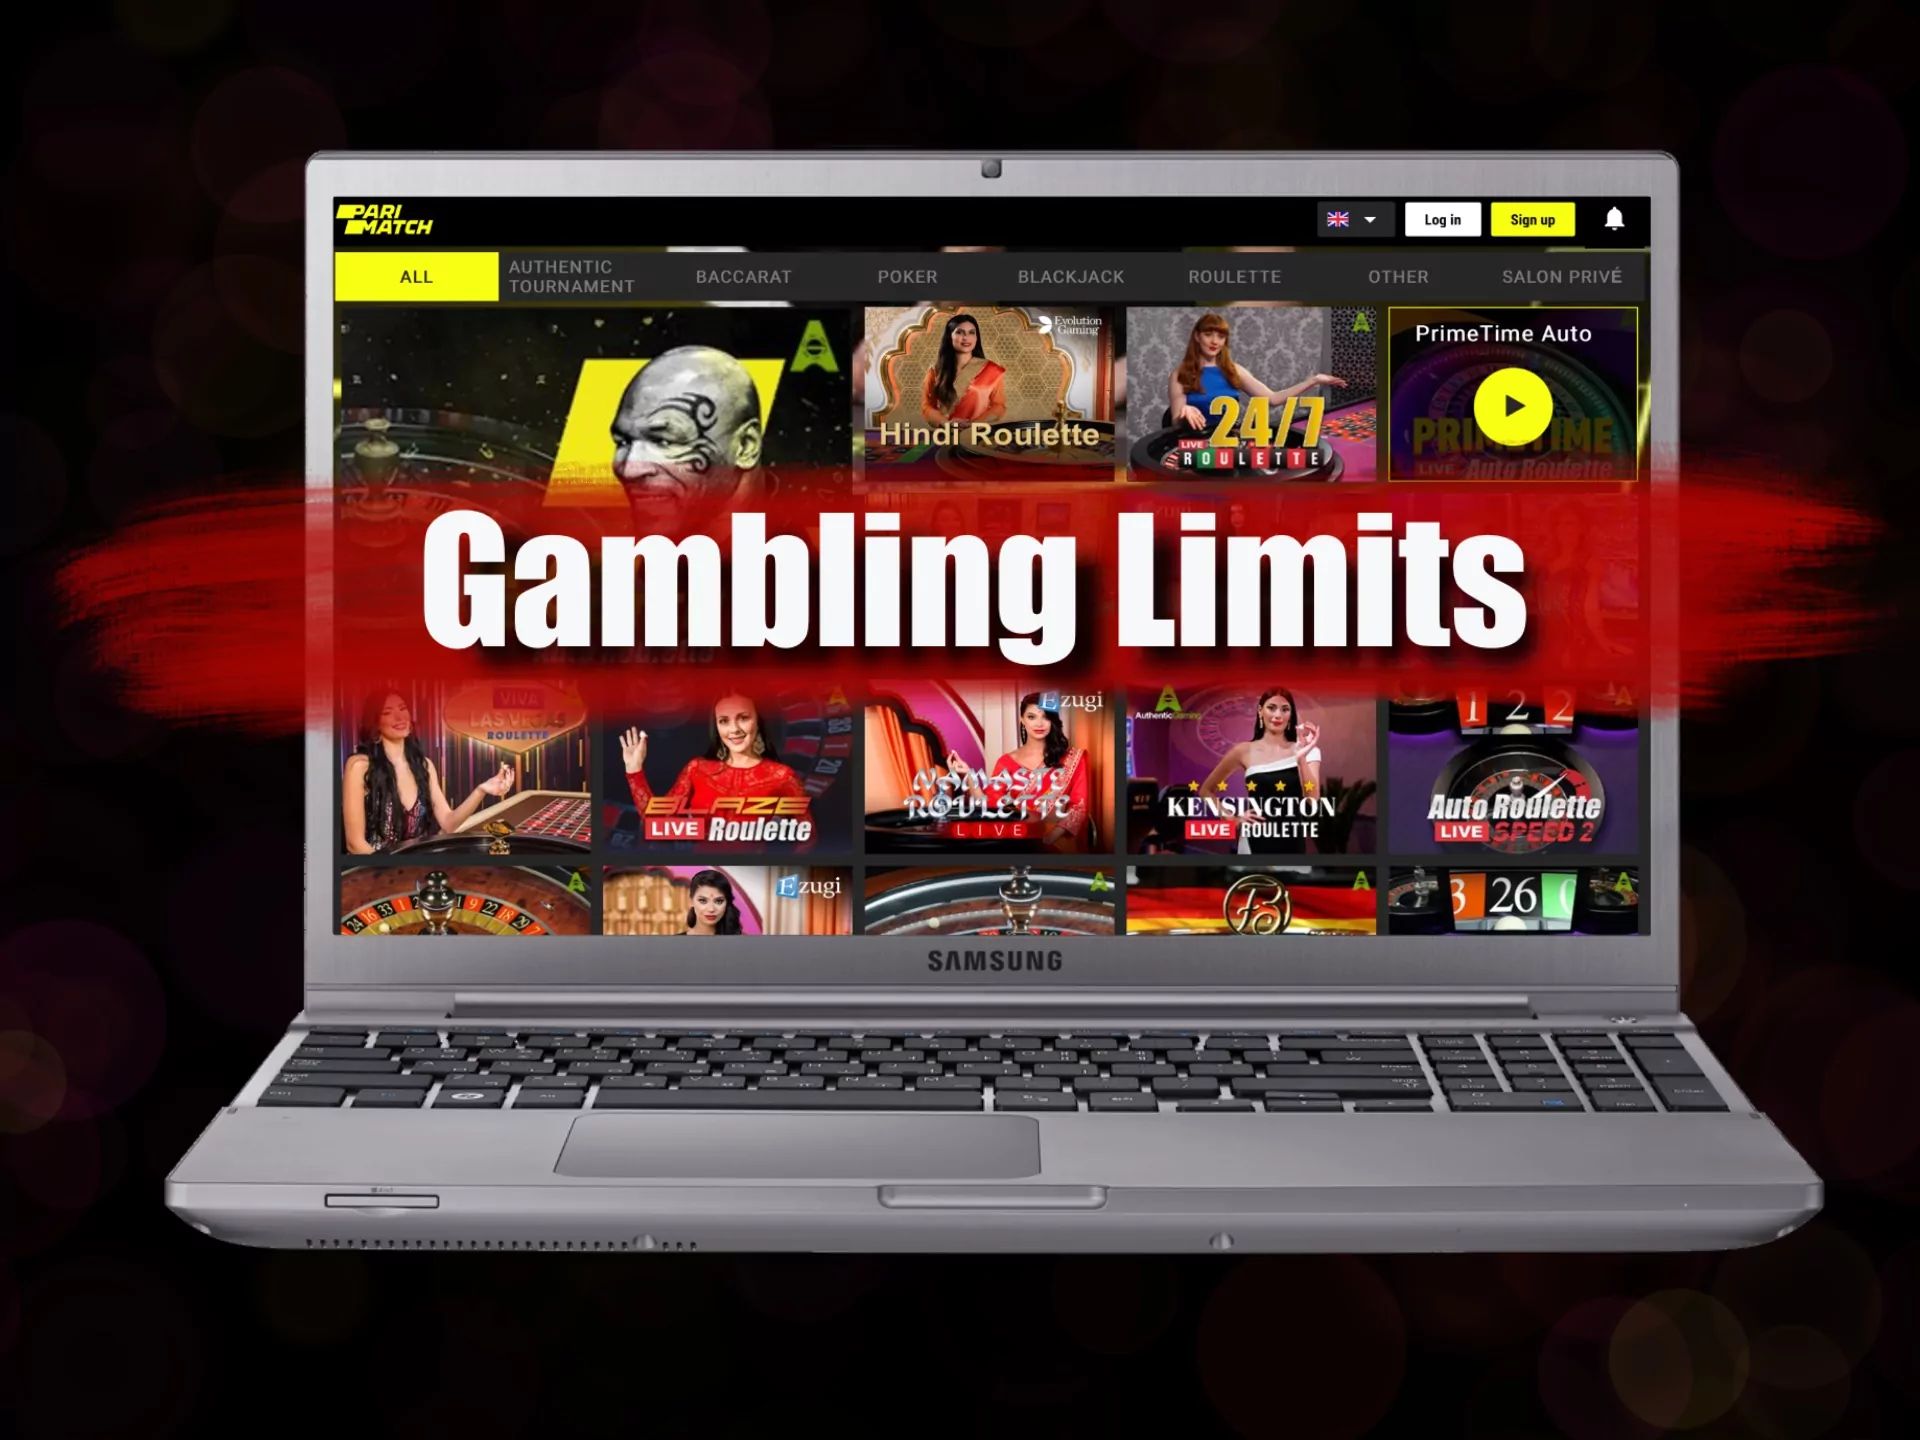 Considering these features Parimatch is a truly unique online casino.